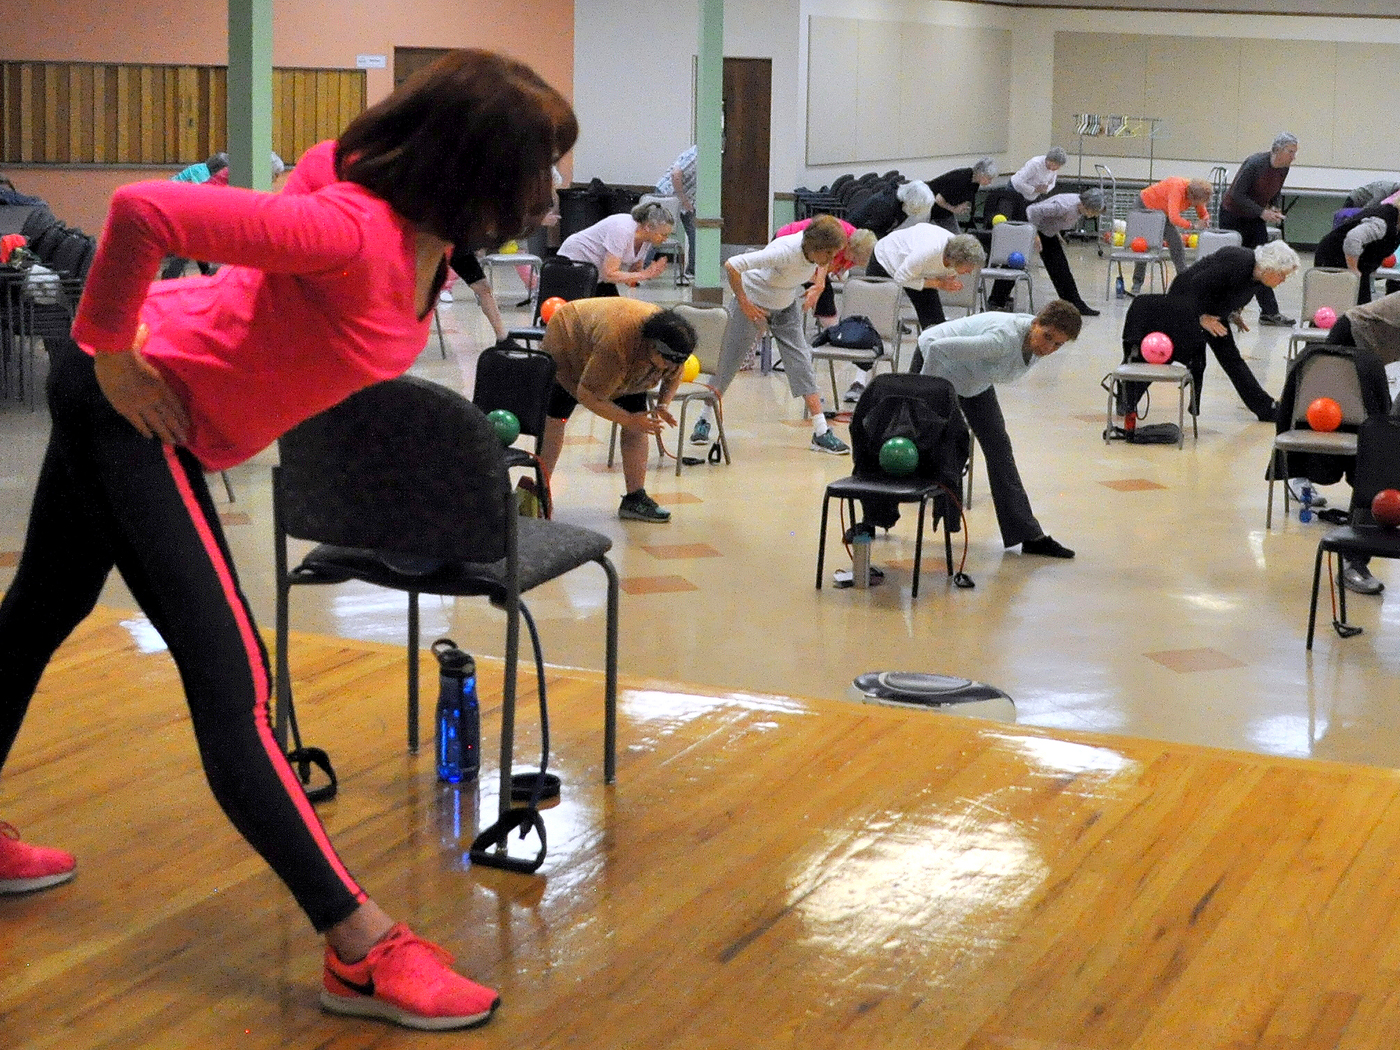 SilverSneakers 2018 Instructor of the Year Margaret Agnew Teaching a Group Fitness Class